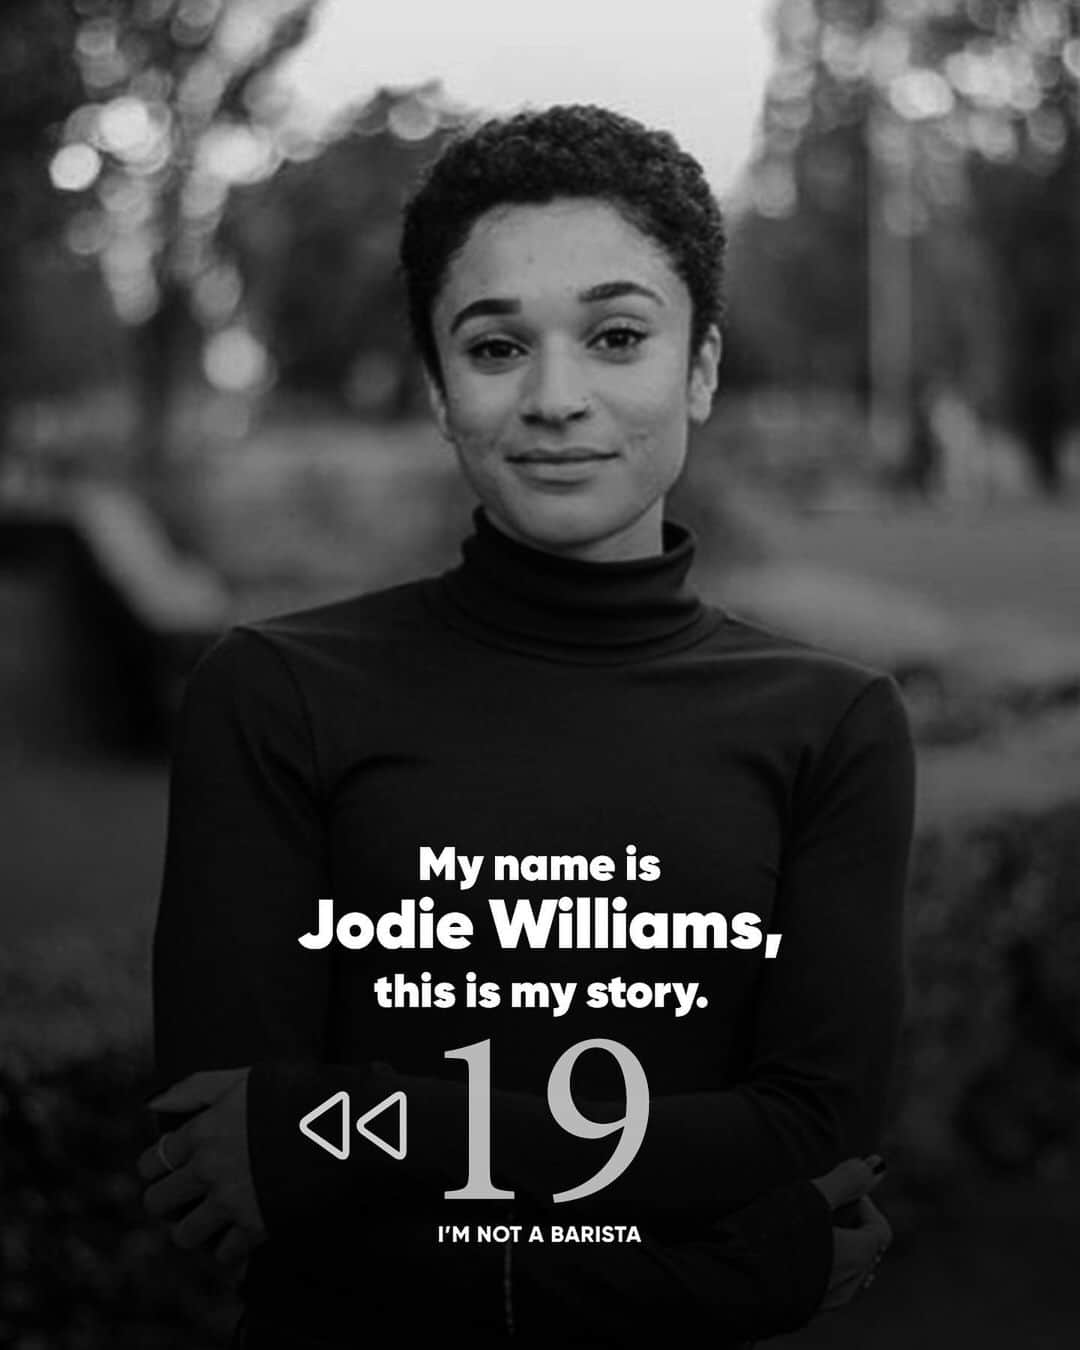 ジョディ・ウィリアムズのインスタグラム：「This is I’M NOT A BARISTA’s STORIES REWIND.  Who said athletes can’t brew? This is the story of Jodie Williams @jodiealicia. Jodie is a Great Britain Olympian who has been surging forward in her quest to be more than just an athlete. She blends her athleticism with her coffee experience as she pushes for better living conditions for women in coffee farming communities.  Jodie has taken a keen interest in women in coffee farming communities, specifically how they are affected by low wages and a lack of opportunities for leadership and management. She is an ambassador for Femlead, a Ugandan NGO that works to empower young women to reach their full potential through educational workshops and local community engagement.   Article by Oluwatobifunmi Olaniran. Read the full article with the link in our bio.  —  We need your help, act today.  We have featured hundreds of coffee stories on the internet. Now we want to bring their voices to the front line and share their stories directly with coffee lovers in coffee shops, at homes, in bookshops, and everywhere coffee enthusiasts exist. And for those with reading disabilities or too busy to sit down to read, we invited professional narrators to narrate these stories for your listening pleasure. For only $28, you will have a beautiful hardback and an audio book with 101 coffee stories you can listen to on the go.  Act today, back the book on Kickstarter, ask your coffee friends to join us and give a voice to coffee people like you. For only $28 USD, you can get a beautifully designed book of coffee stories, and an audio book.  — Want to share your story? Check the link in our bio and DM us.  #iamnotabarista  #baristaonbike #coffeetrainer  #coffeewristband #coffeestory #barista #speicaltycoffee #rewind #coffeestories #101coffeestories #love #coffeelover #coffeelove #coffeecommunity #colombia #sunday #coffeeroaster #coffeefarmer #mexico #girlpower #brewbar #咖啡师 #咖啡 #バリスタ #باريستا #قهوة #コーヒー #café #caffè」